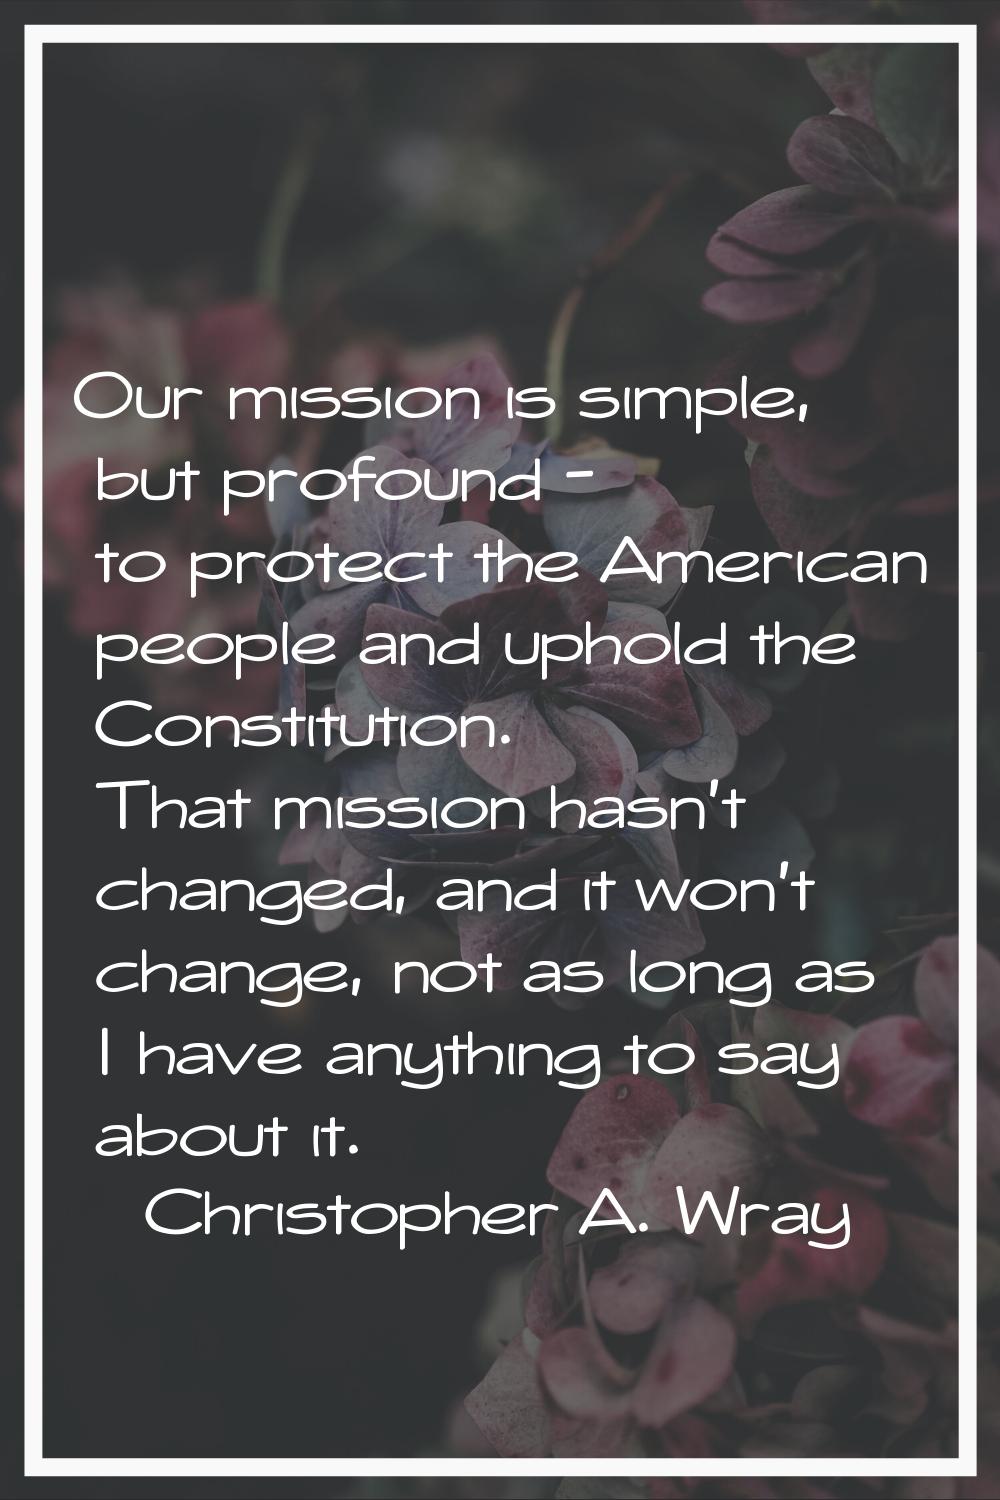 Our mission is simple, but profound - to protect the American people and uphold the Constitution. T